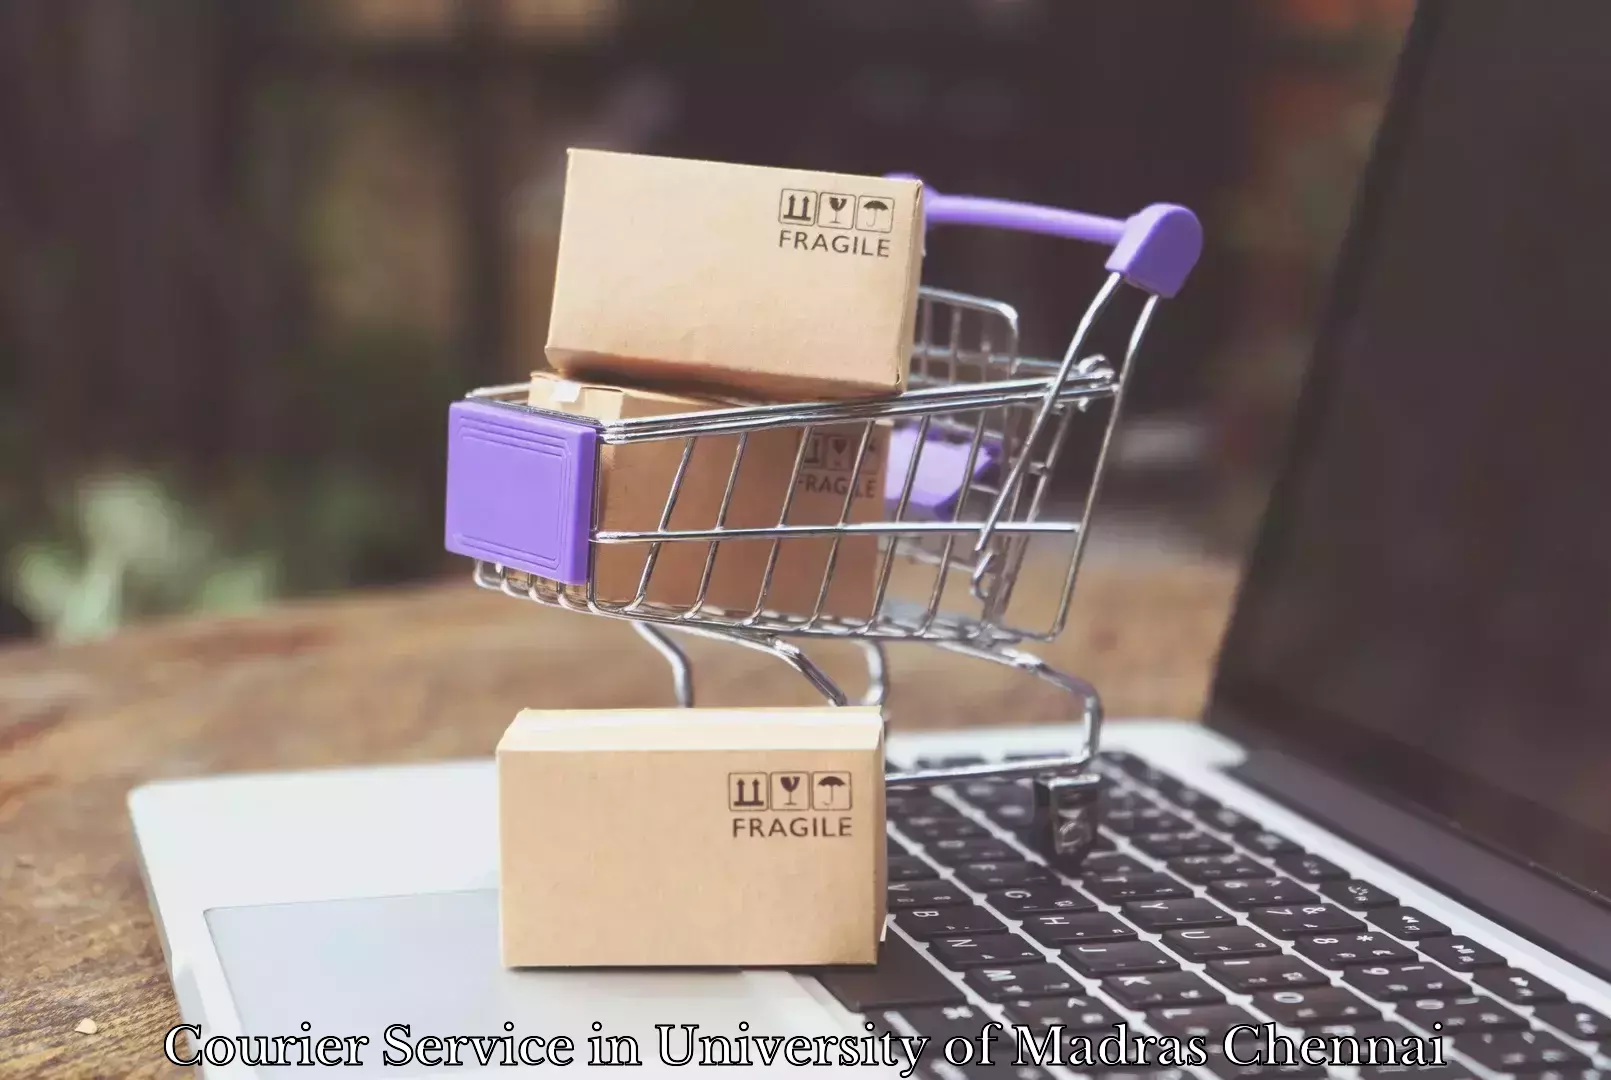 Automated parcel services in University of Madras Chennai